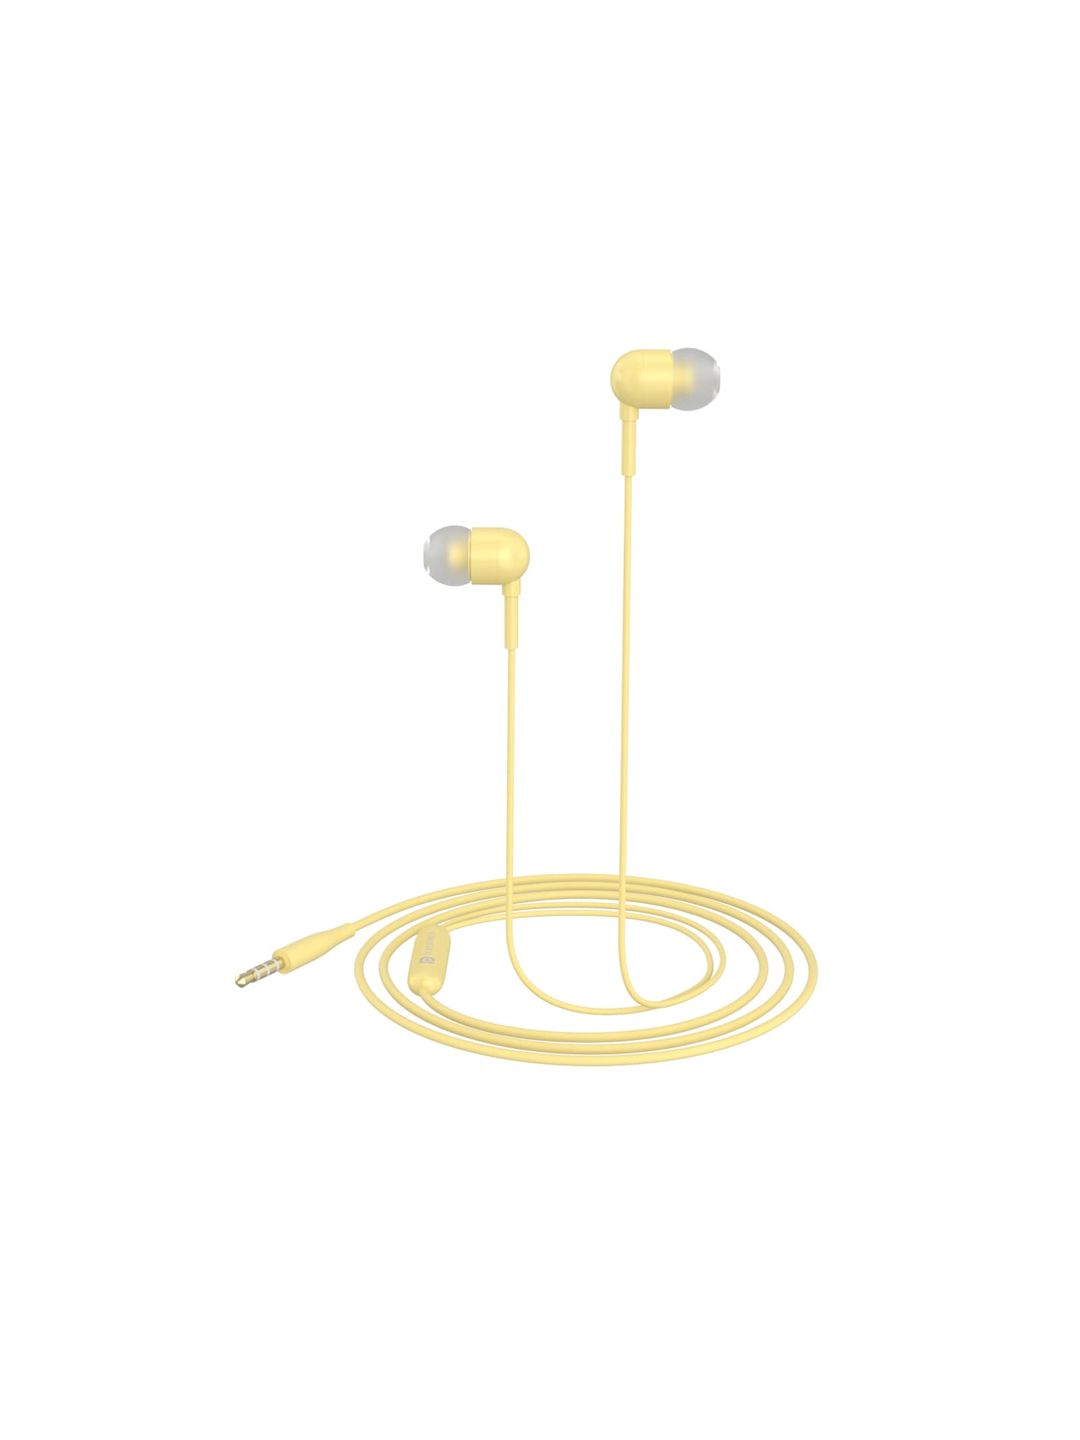 Portronics Yellow Solid 3.5 mm Bass In-Ear Wired Earphones With Mic Price in India